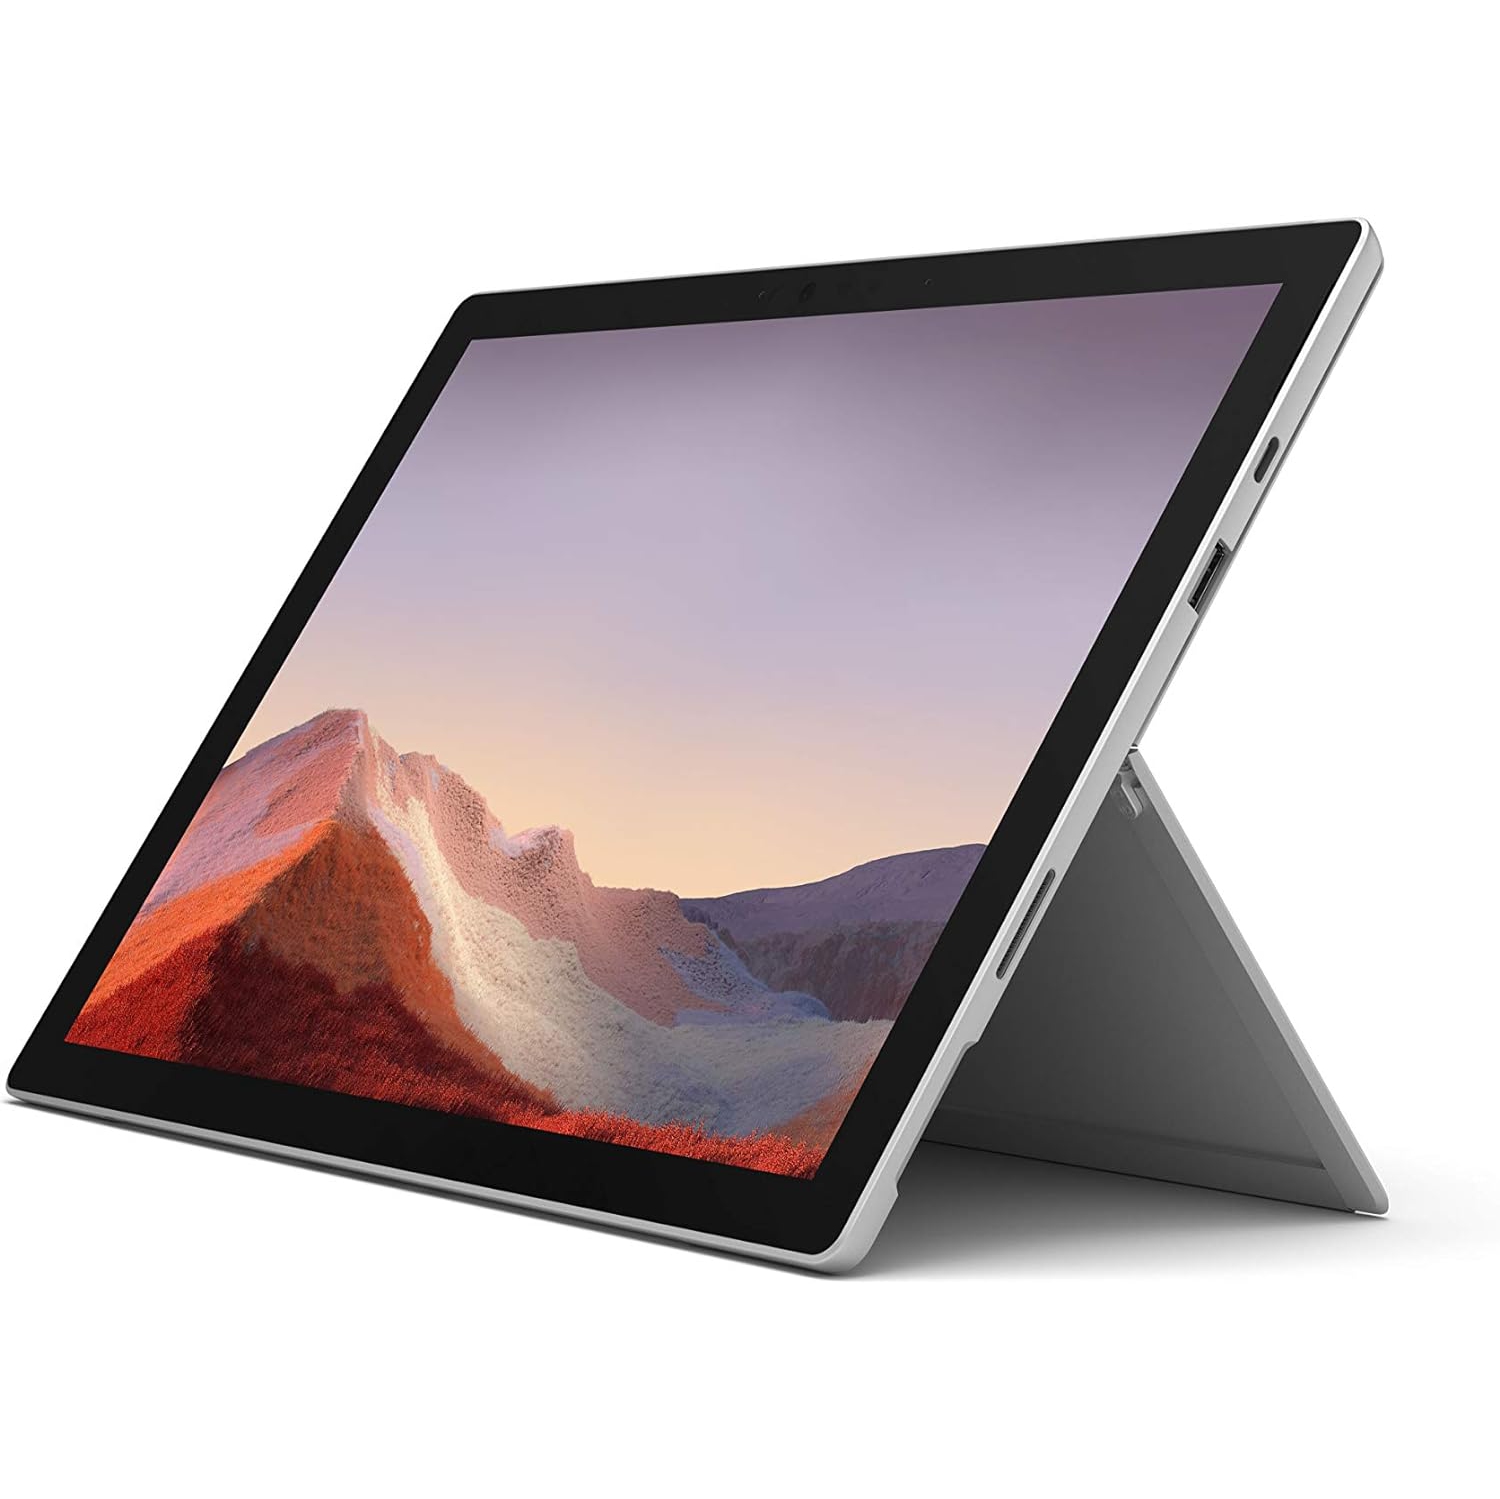 Refurbished (Excellent) Microsoft Surface Pro 7 - Intel Core i3, 4GB RAM, 128GB SSD, Windows 10 Home, Platinum (Device Only)